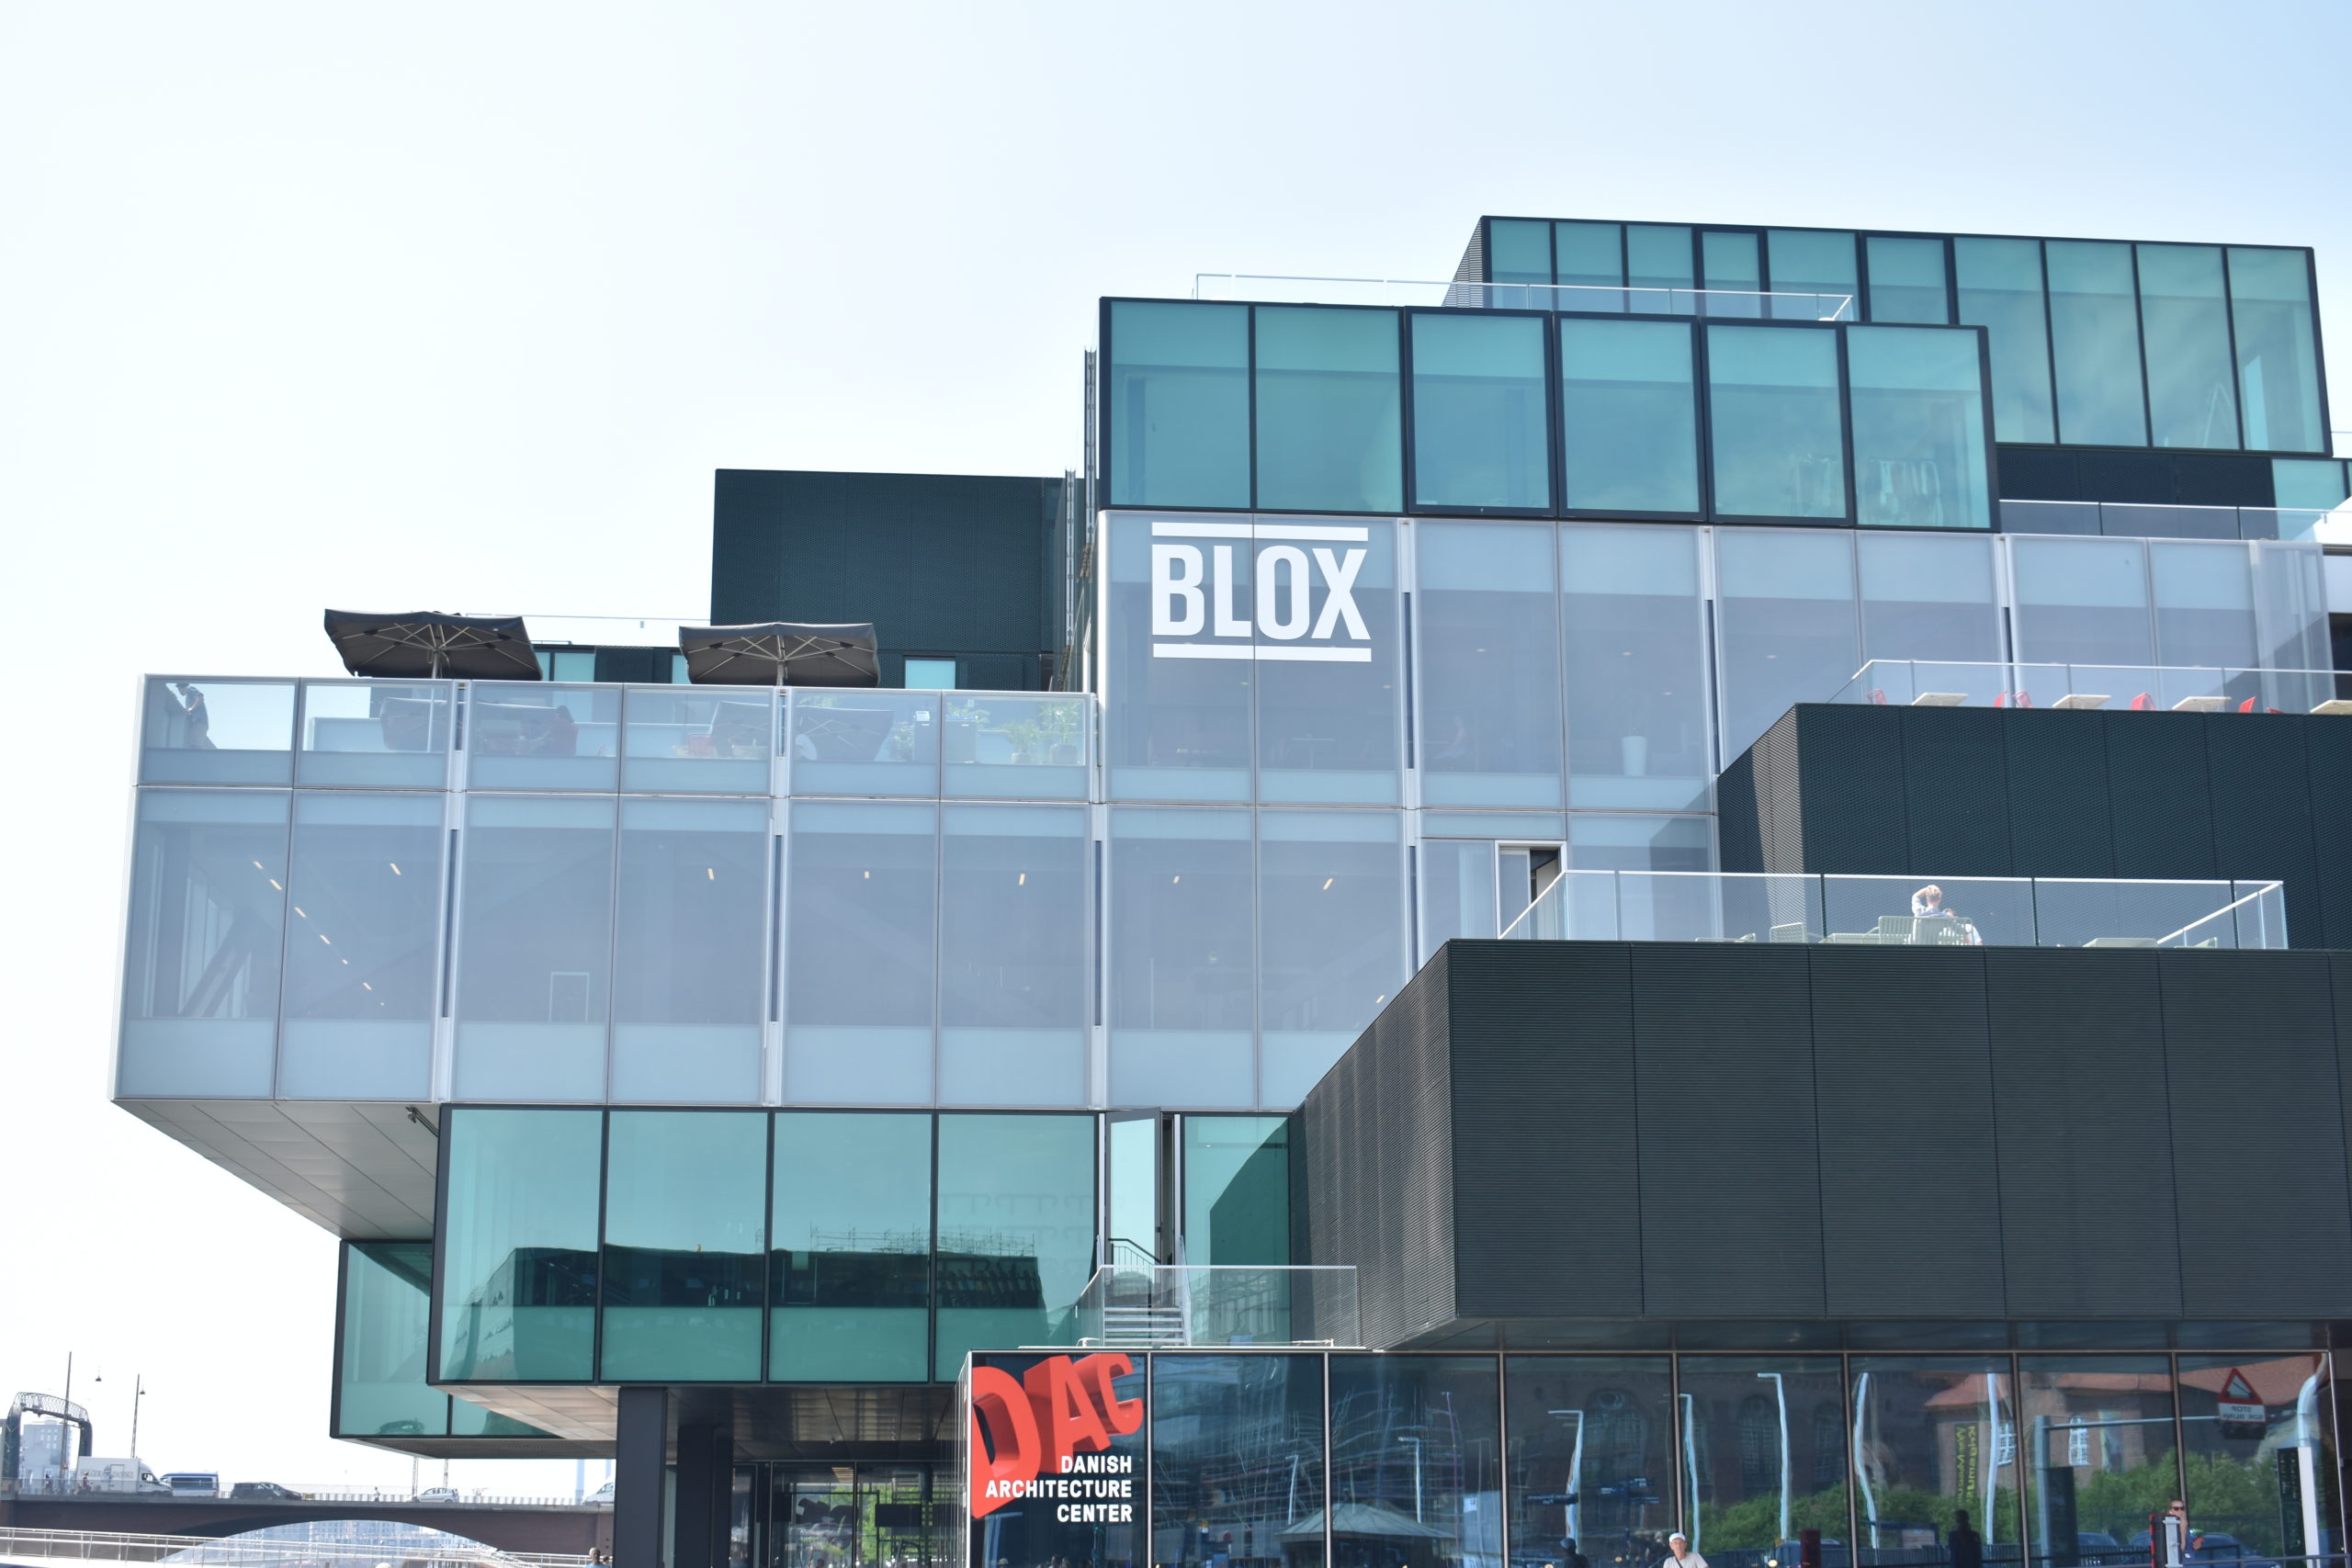 Glass building with BLOX written on the side in white lettering